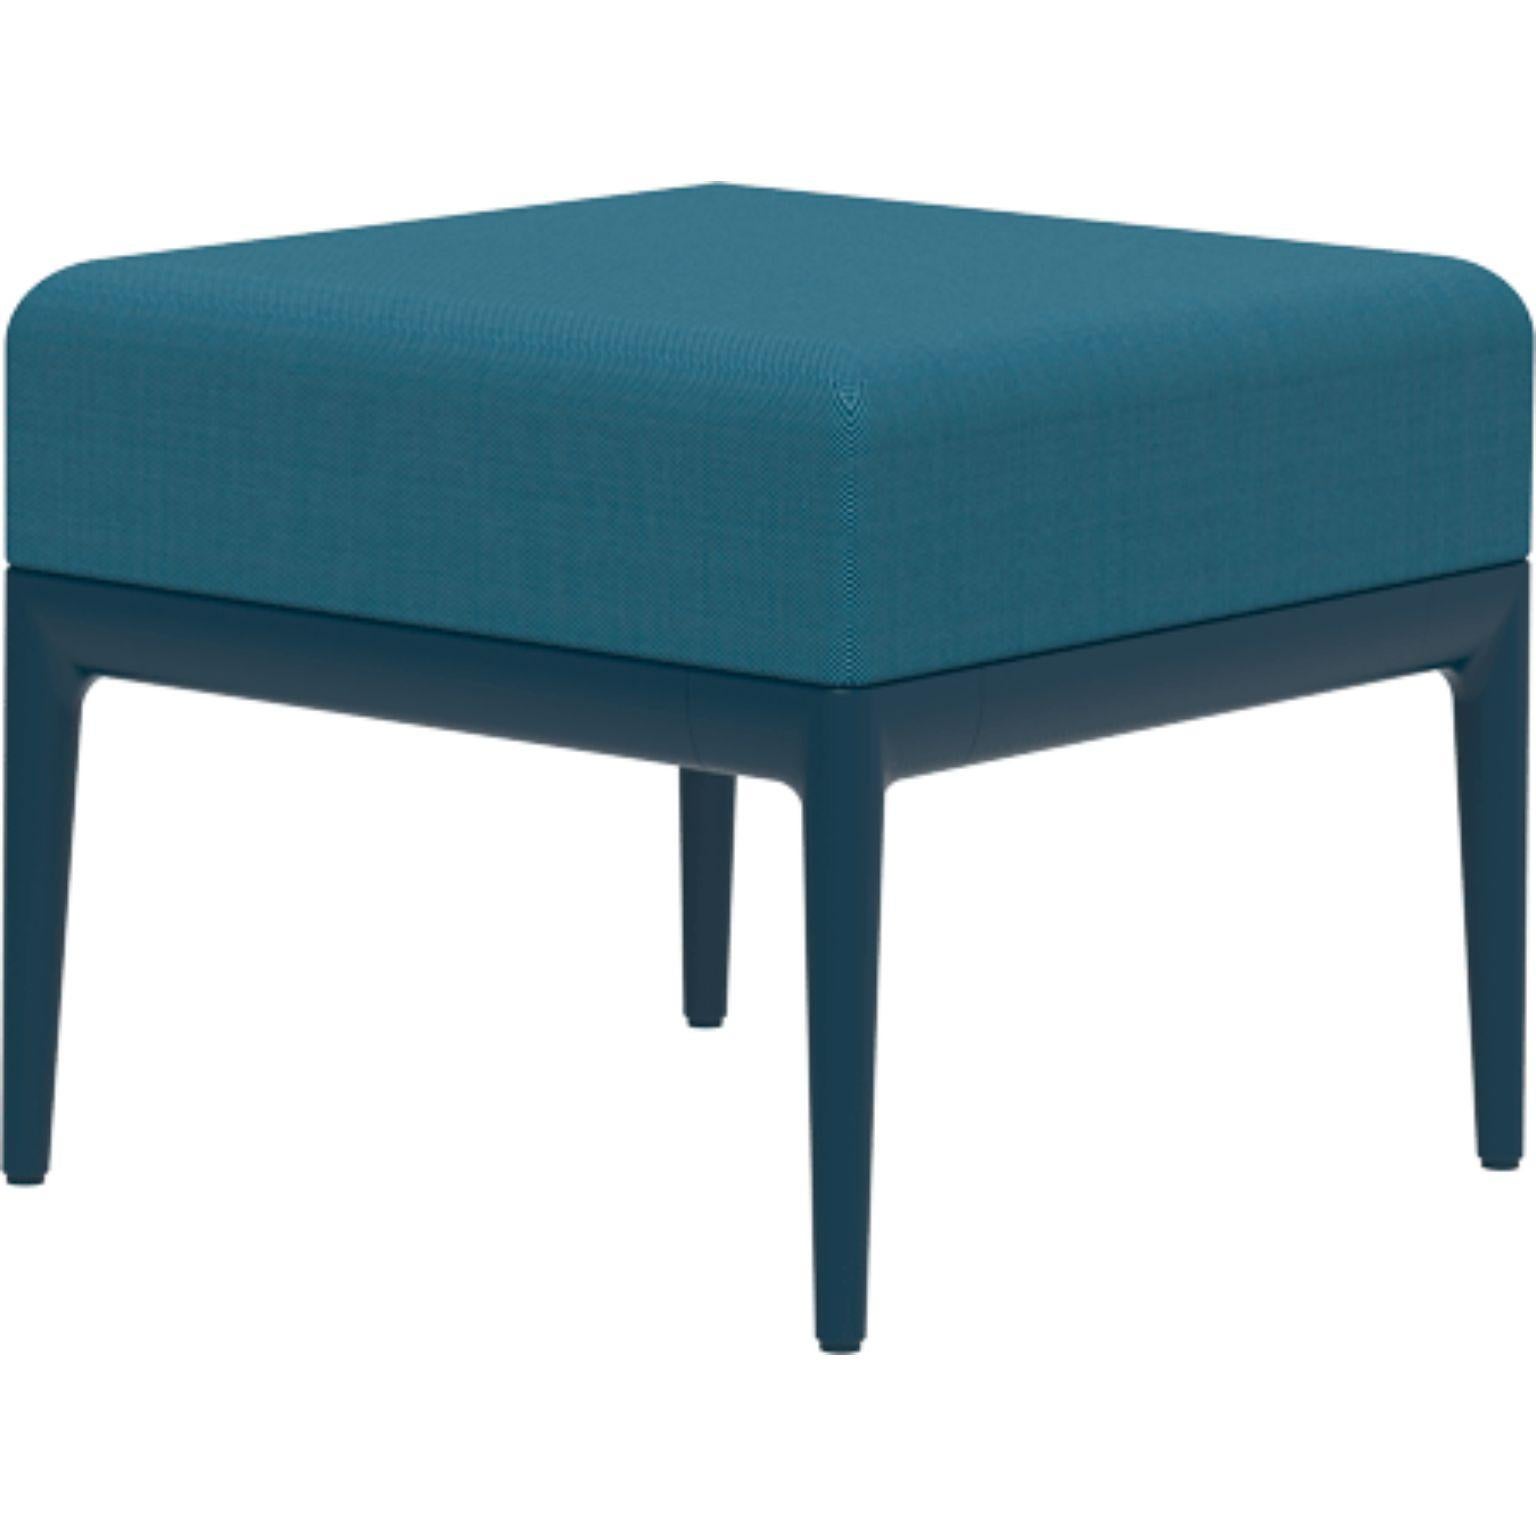 Ribbons Navy Puff by MOWEE
Dimensions: D50 x W50 x H42 cm.
Material: Aluminum and upholstery.
Weight: 9.3 kg
Also available in different colors and finishes. 

An unmistakable collection for its beauty and robustness. A tribute to the